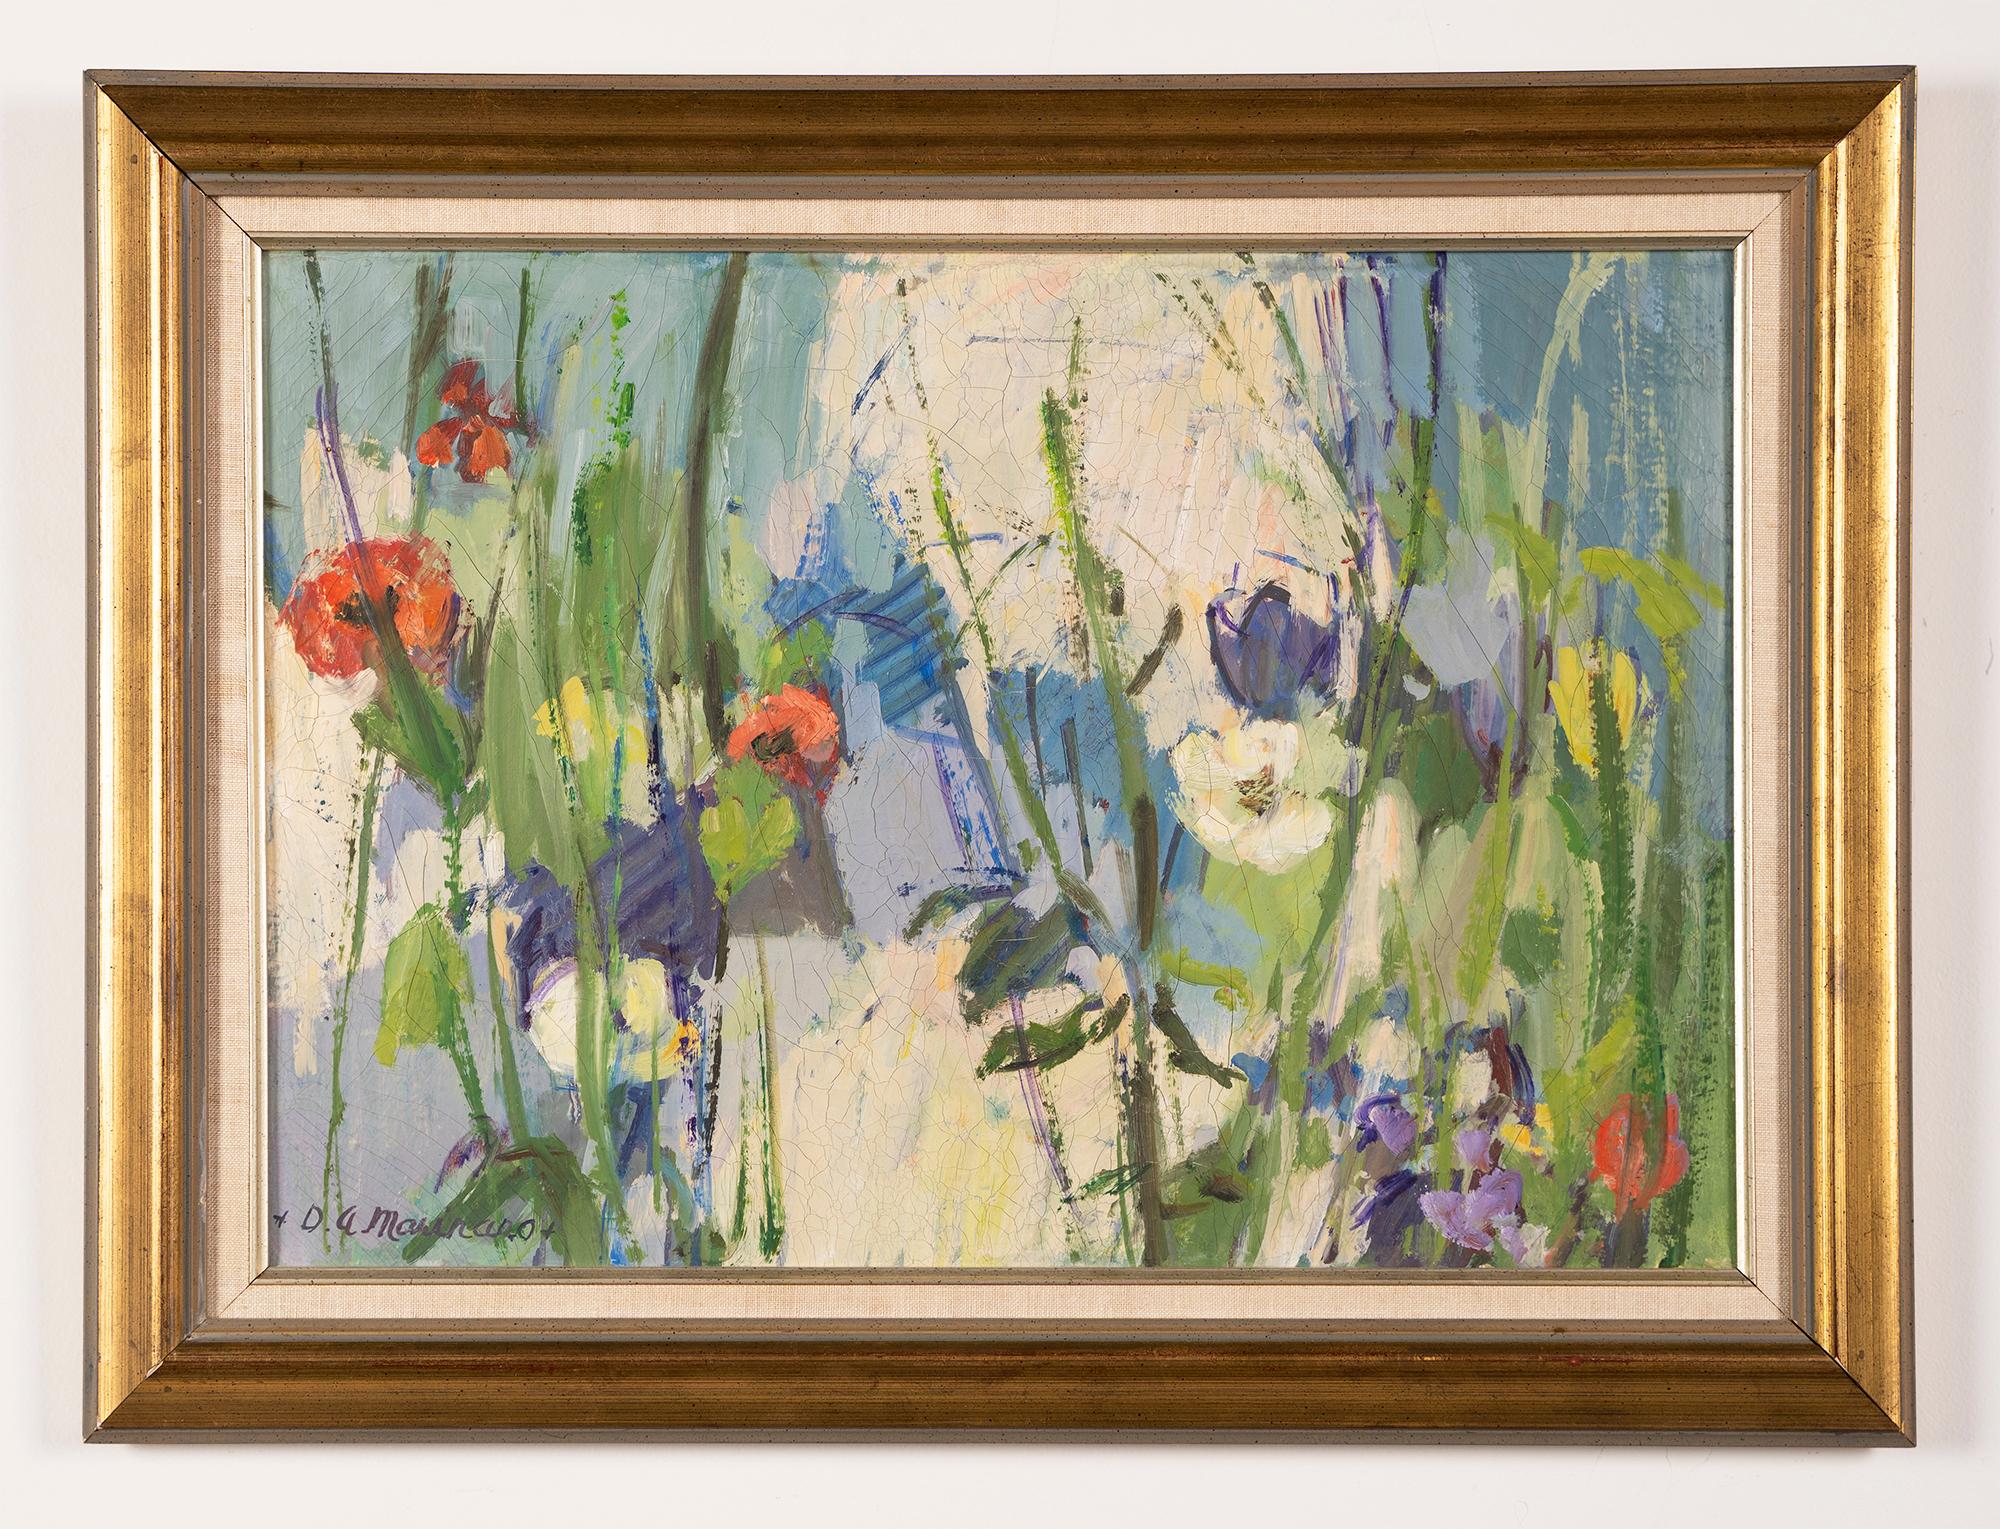 Vintage American modernist abstract still life oil painting.  Oil on canvas, circa 1950.  Signed illegibly.  Image size, 20L x 14H.  Framed in a period frame.